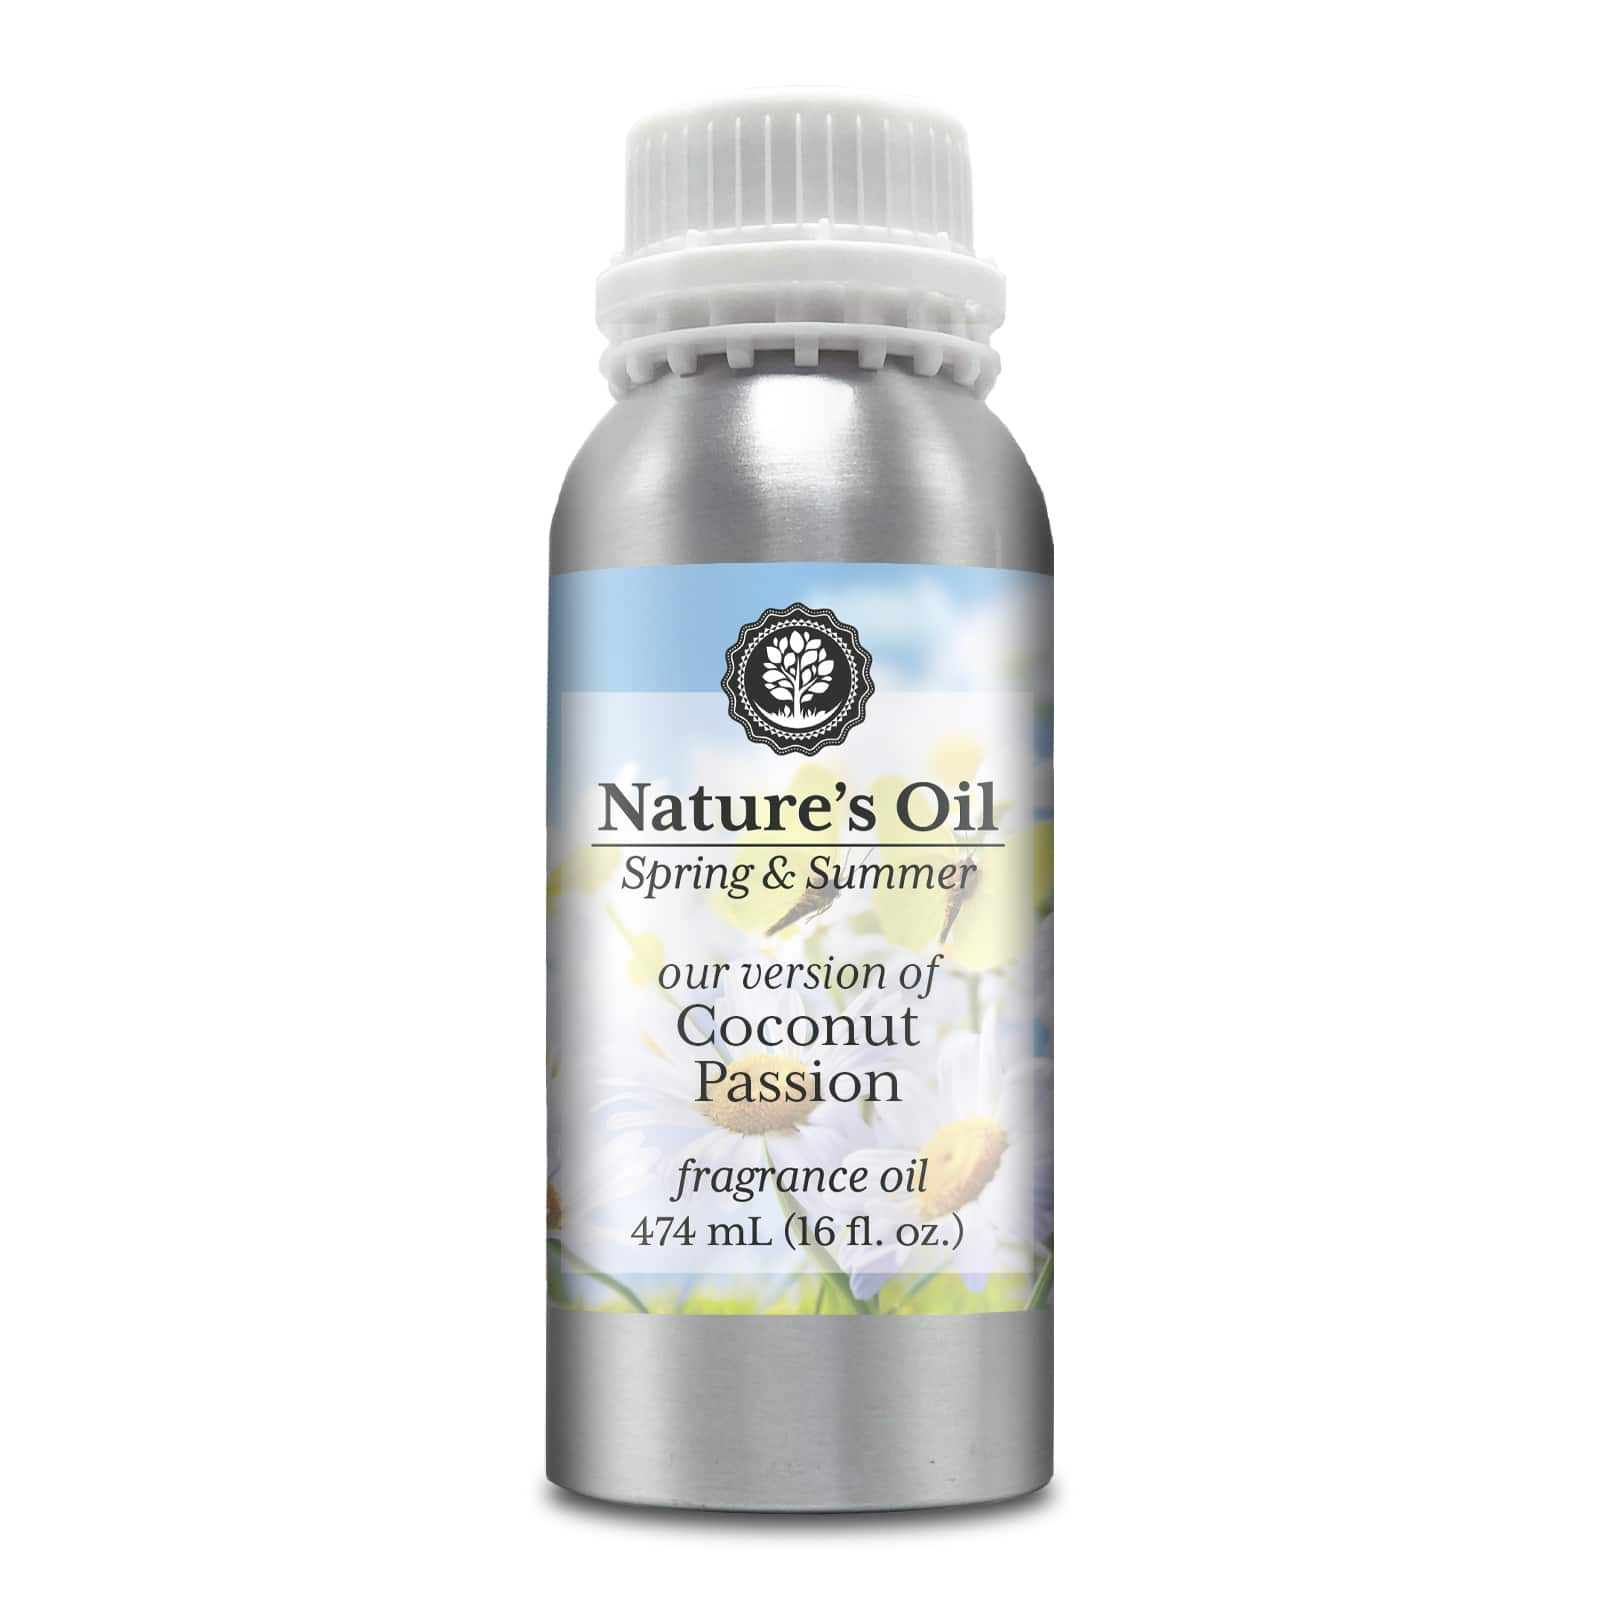 Nature's Oil Our Version of Coconut Passion Fragrance Oil